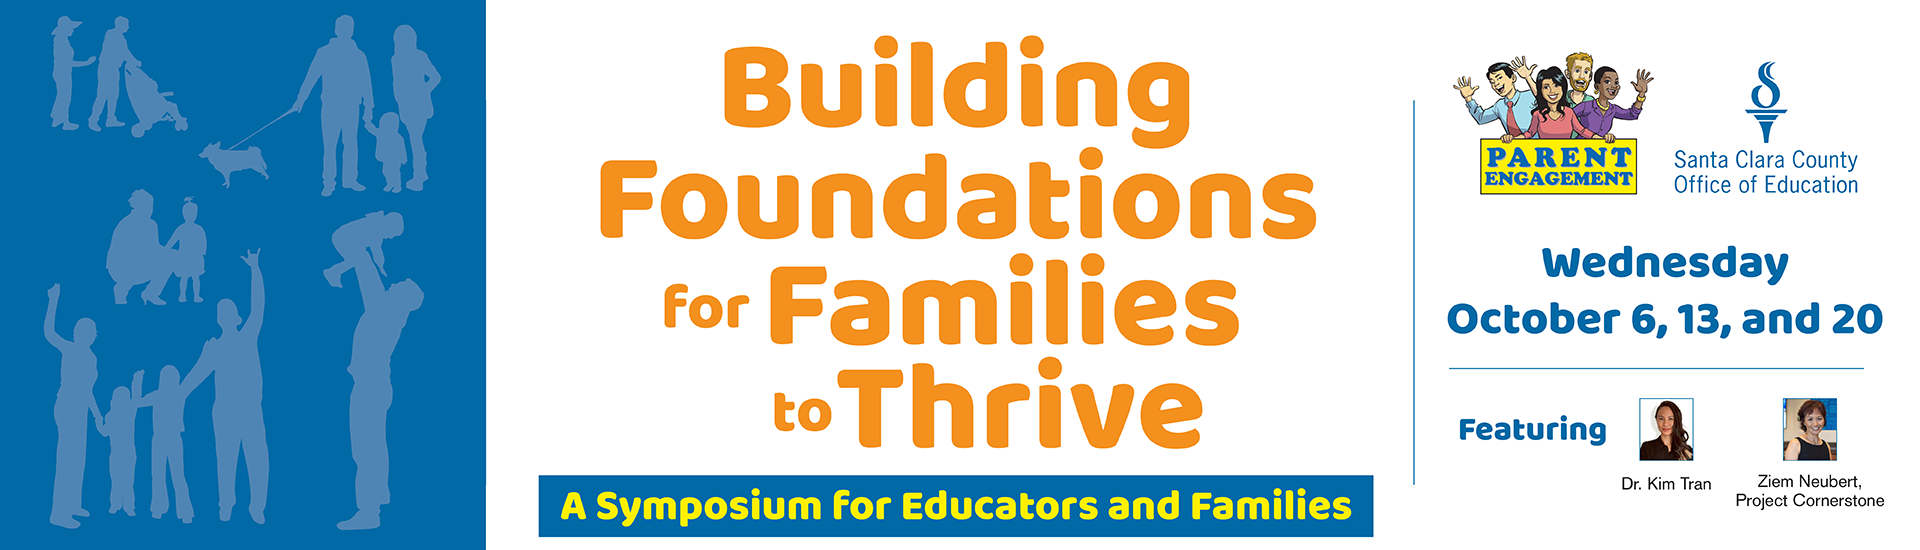 Parent Engagement Program - Building Foundations for Families to Thrive